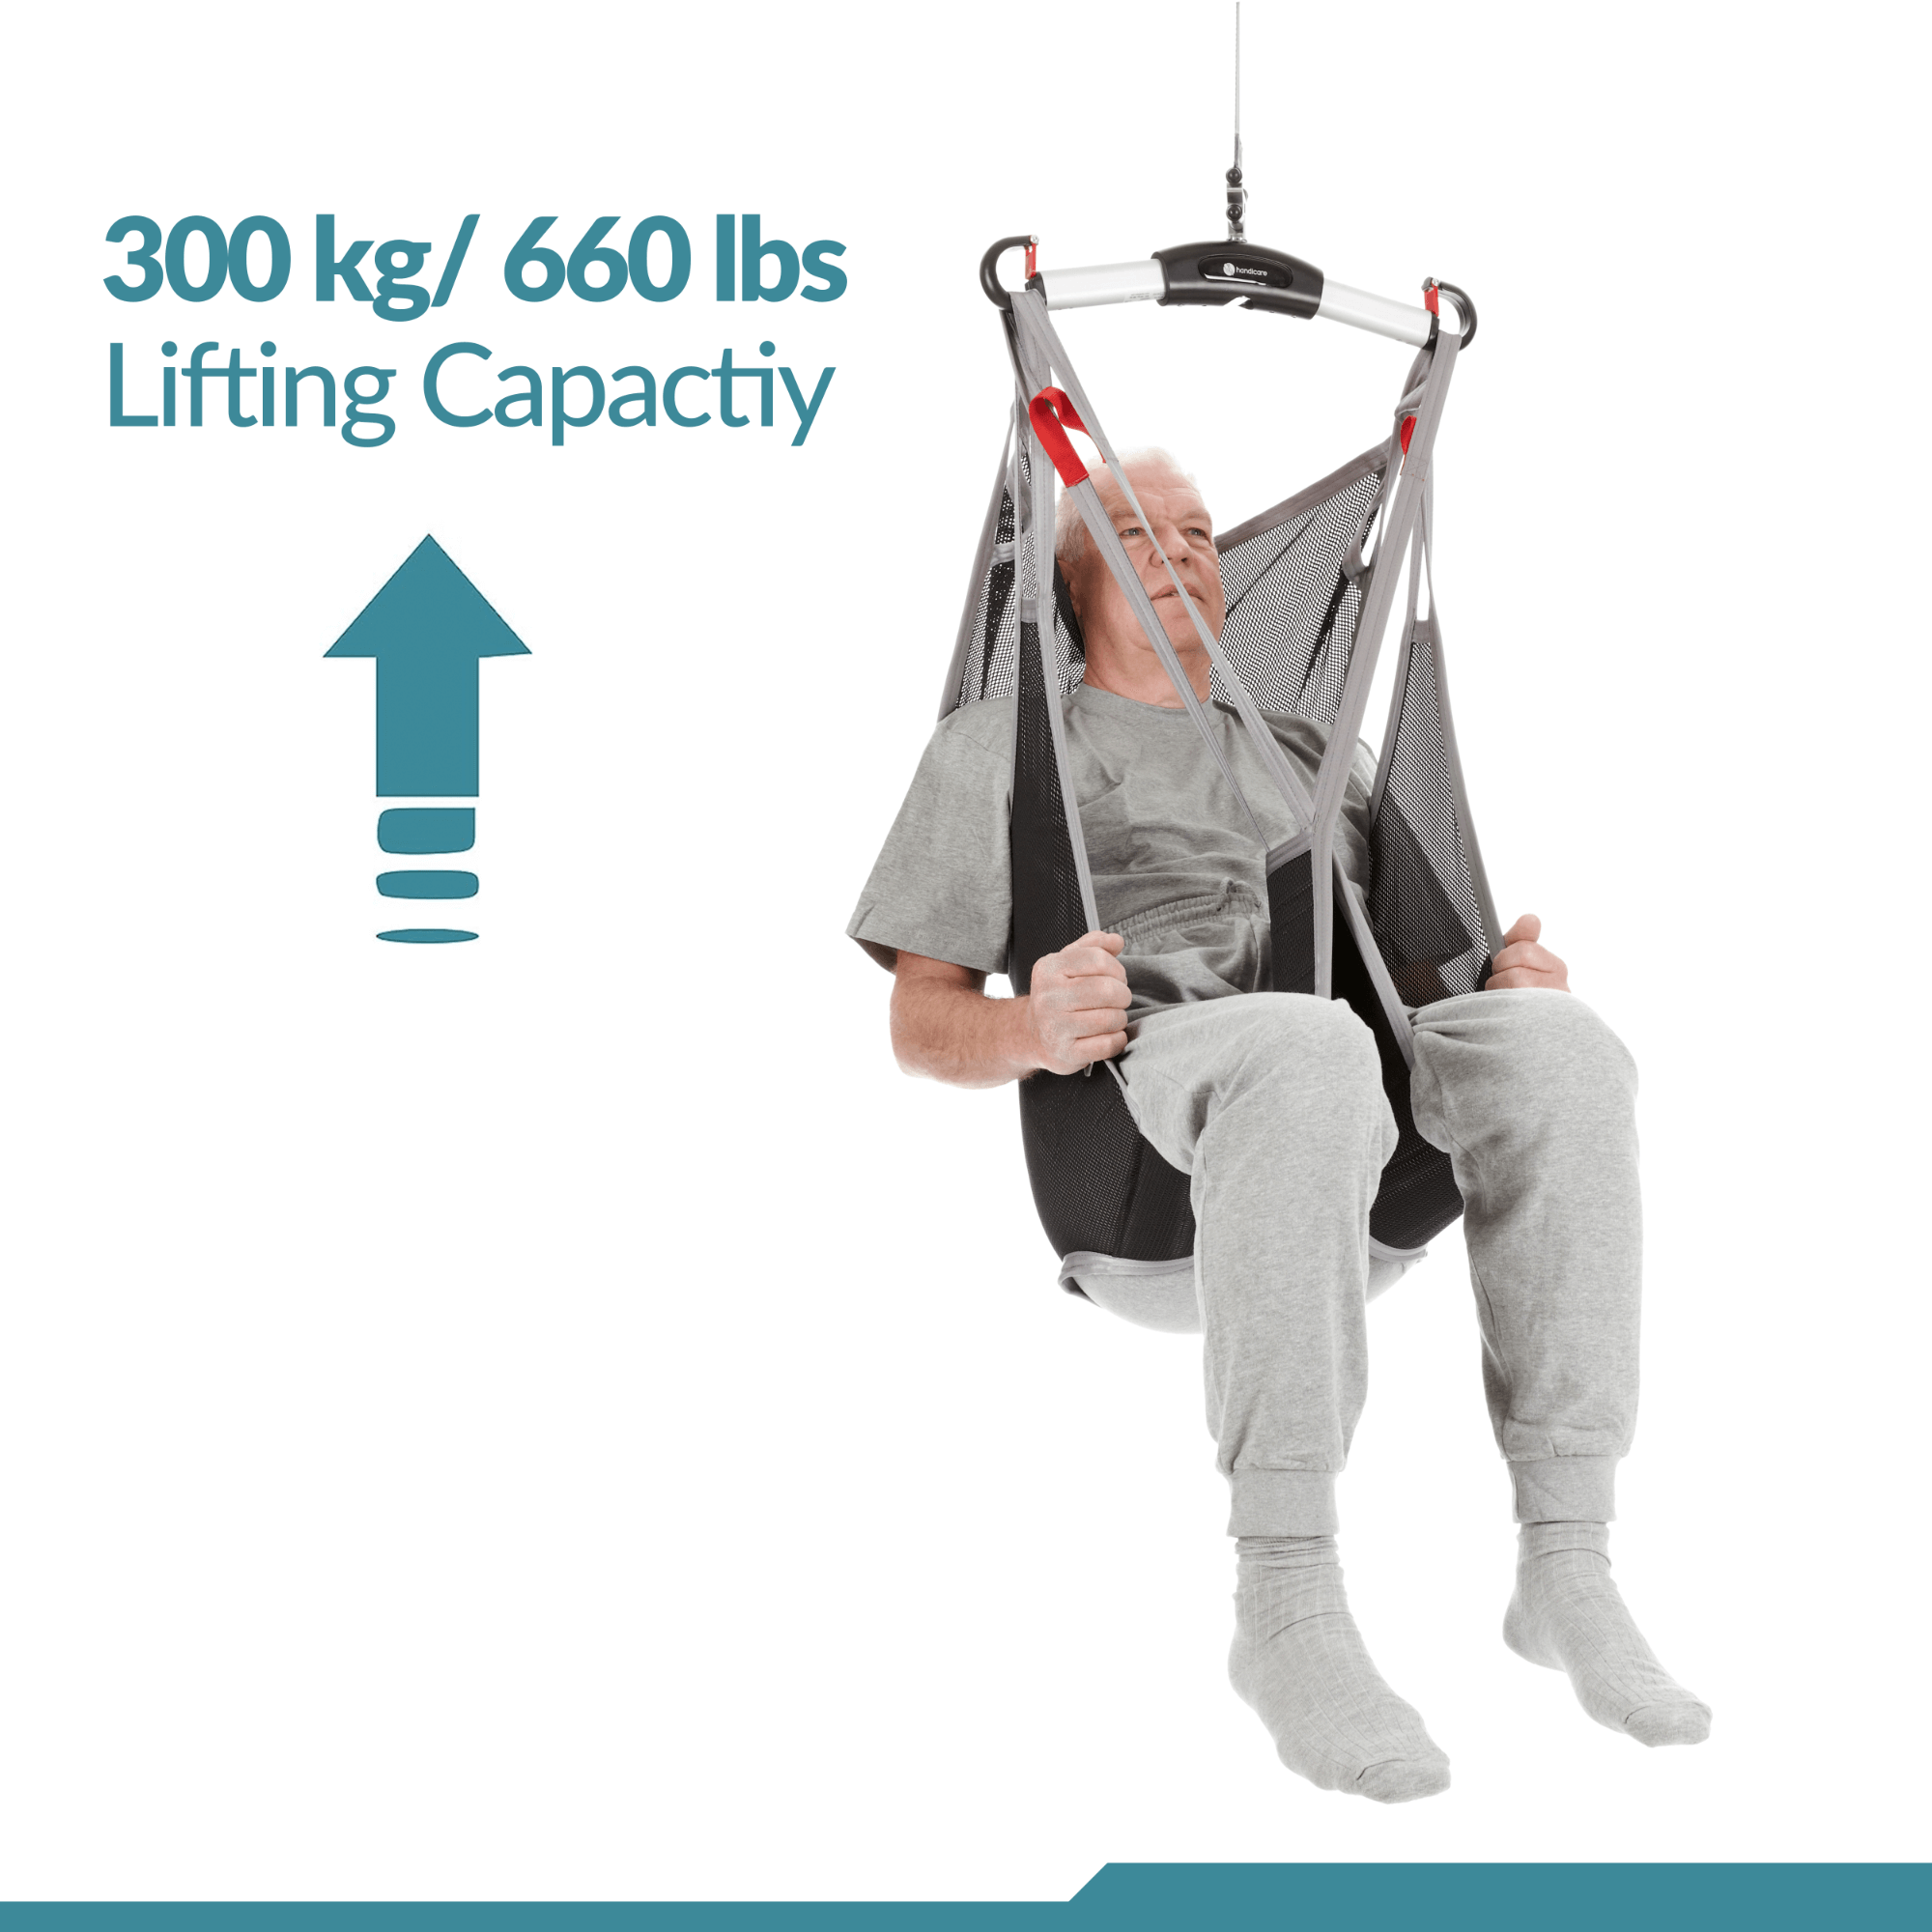 Extra Body Support Sling - Toileting Sling - Universal Patient Lift Sling for Lifts for Home Use - Transfer Safely with Patient Lifter - Compatible with Hoyer Lift - Easy-to-Use